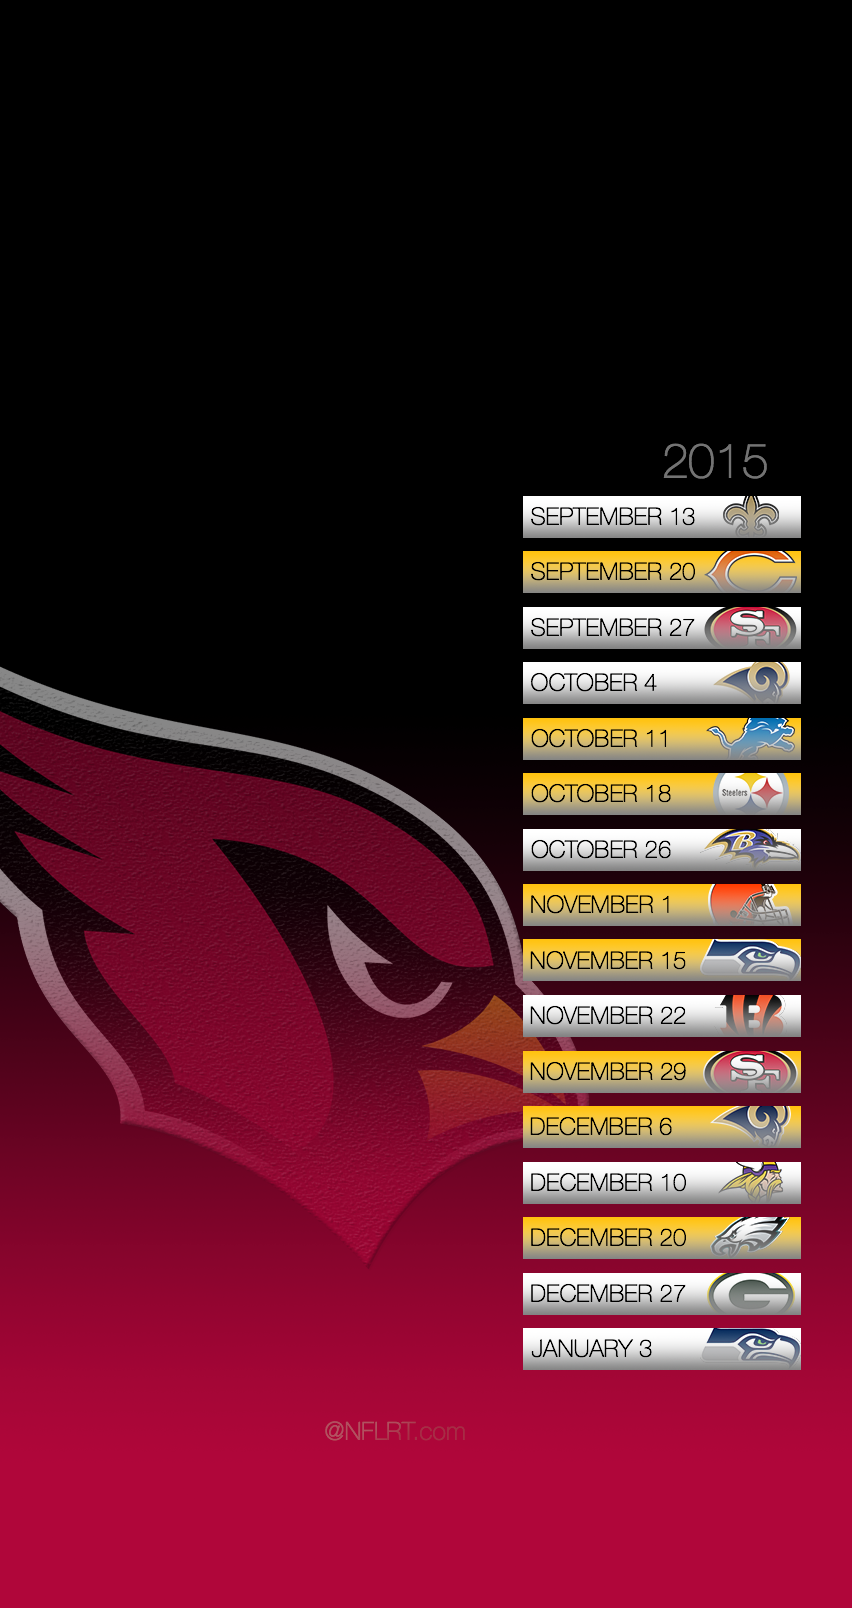 2015 NFL Schedule Wallpapers   Page 8 of 8   NFLRT 852x1608